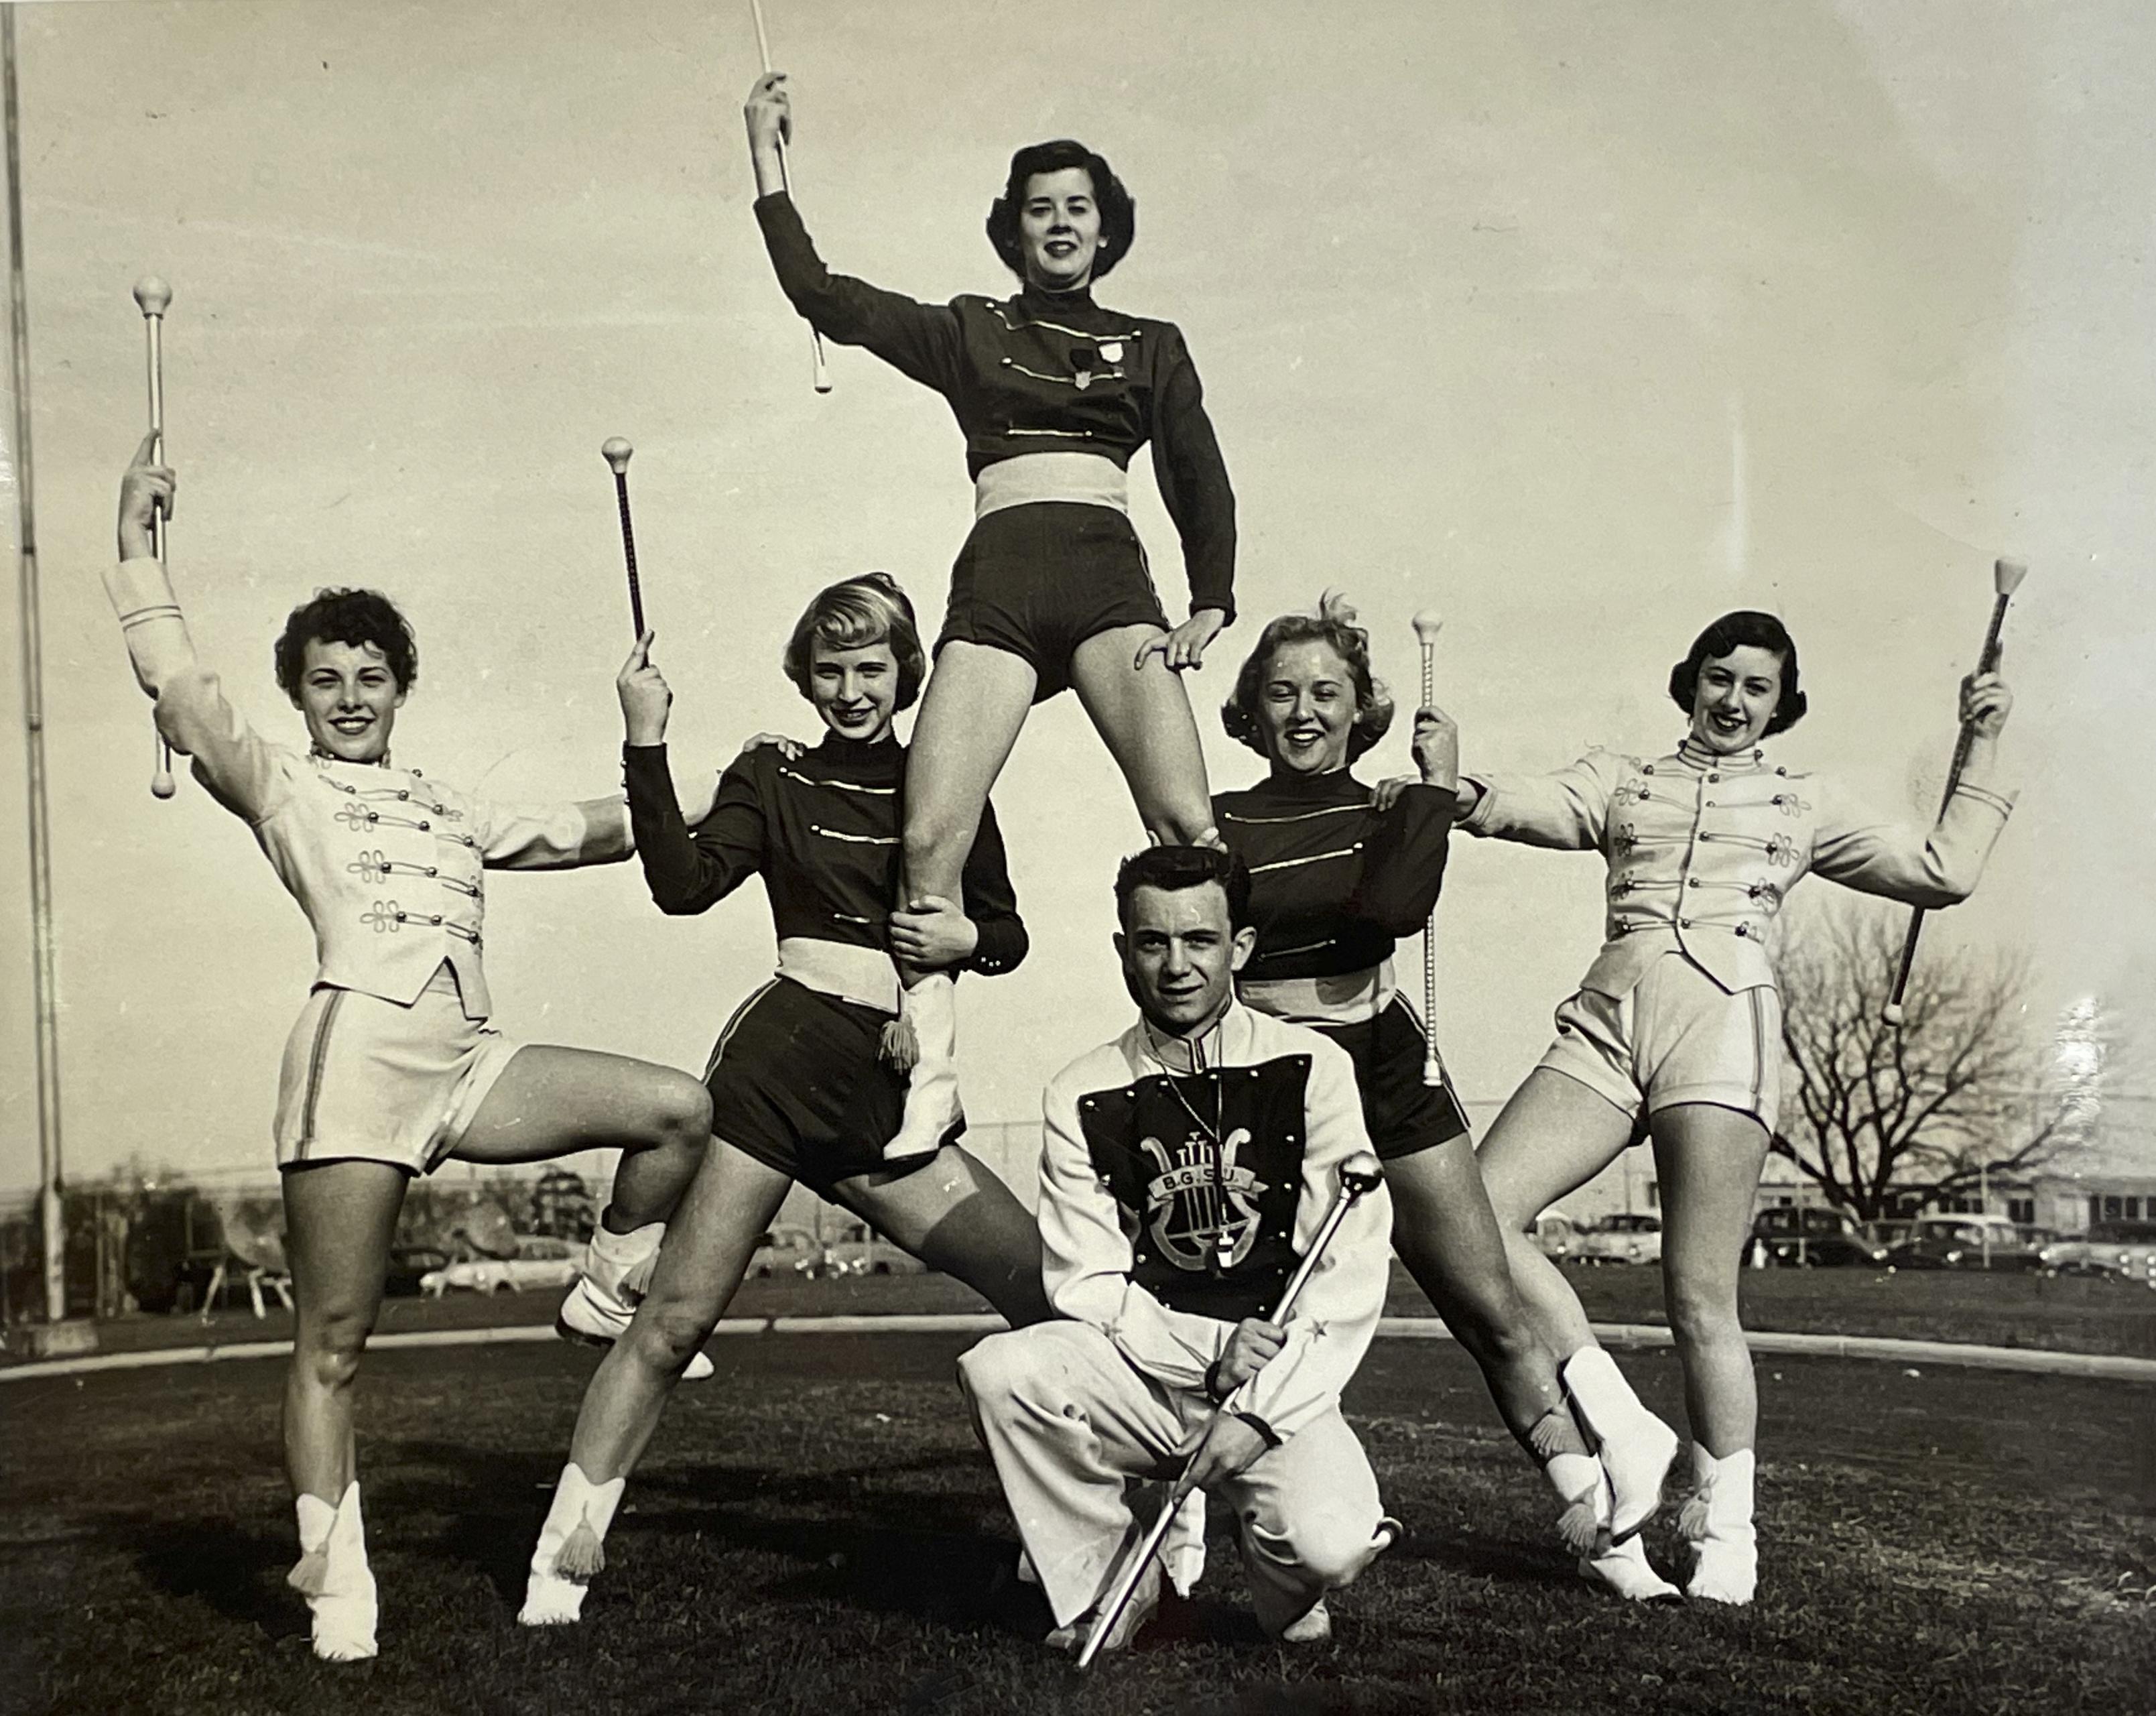 Five majorettes and a drum major pose in a pyramid formation